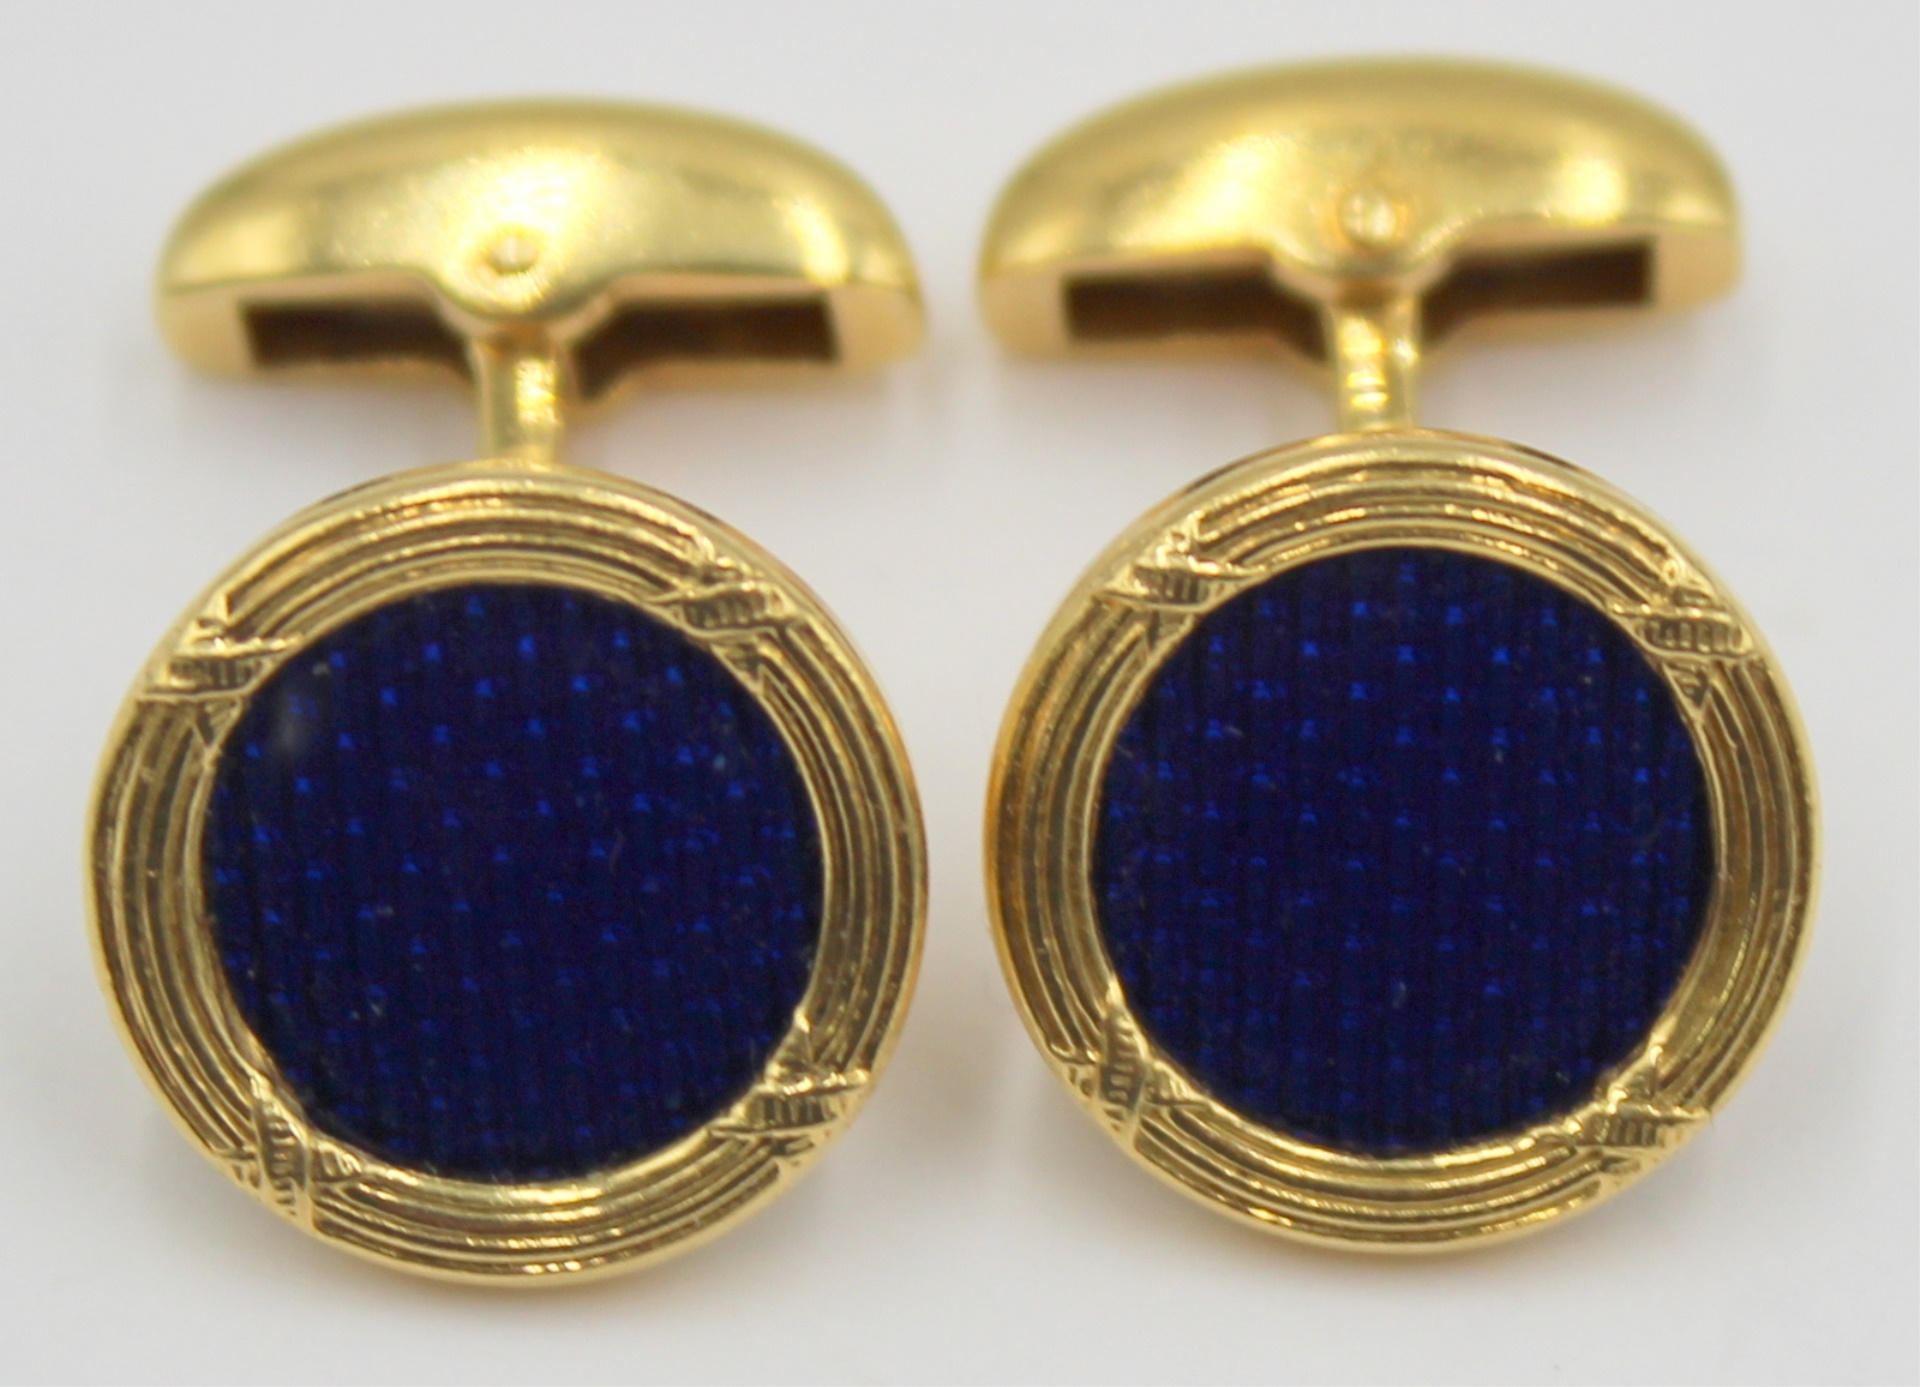 JEWELRY PAIR OF 18KT GOLD DEAKIN 3bc2c3